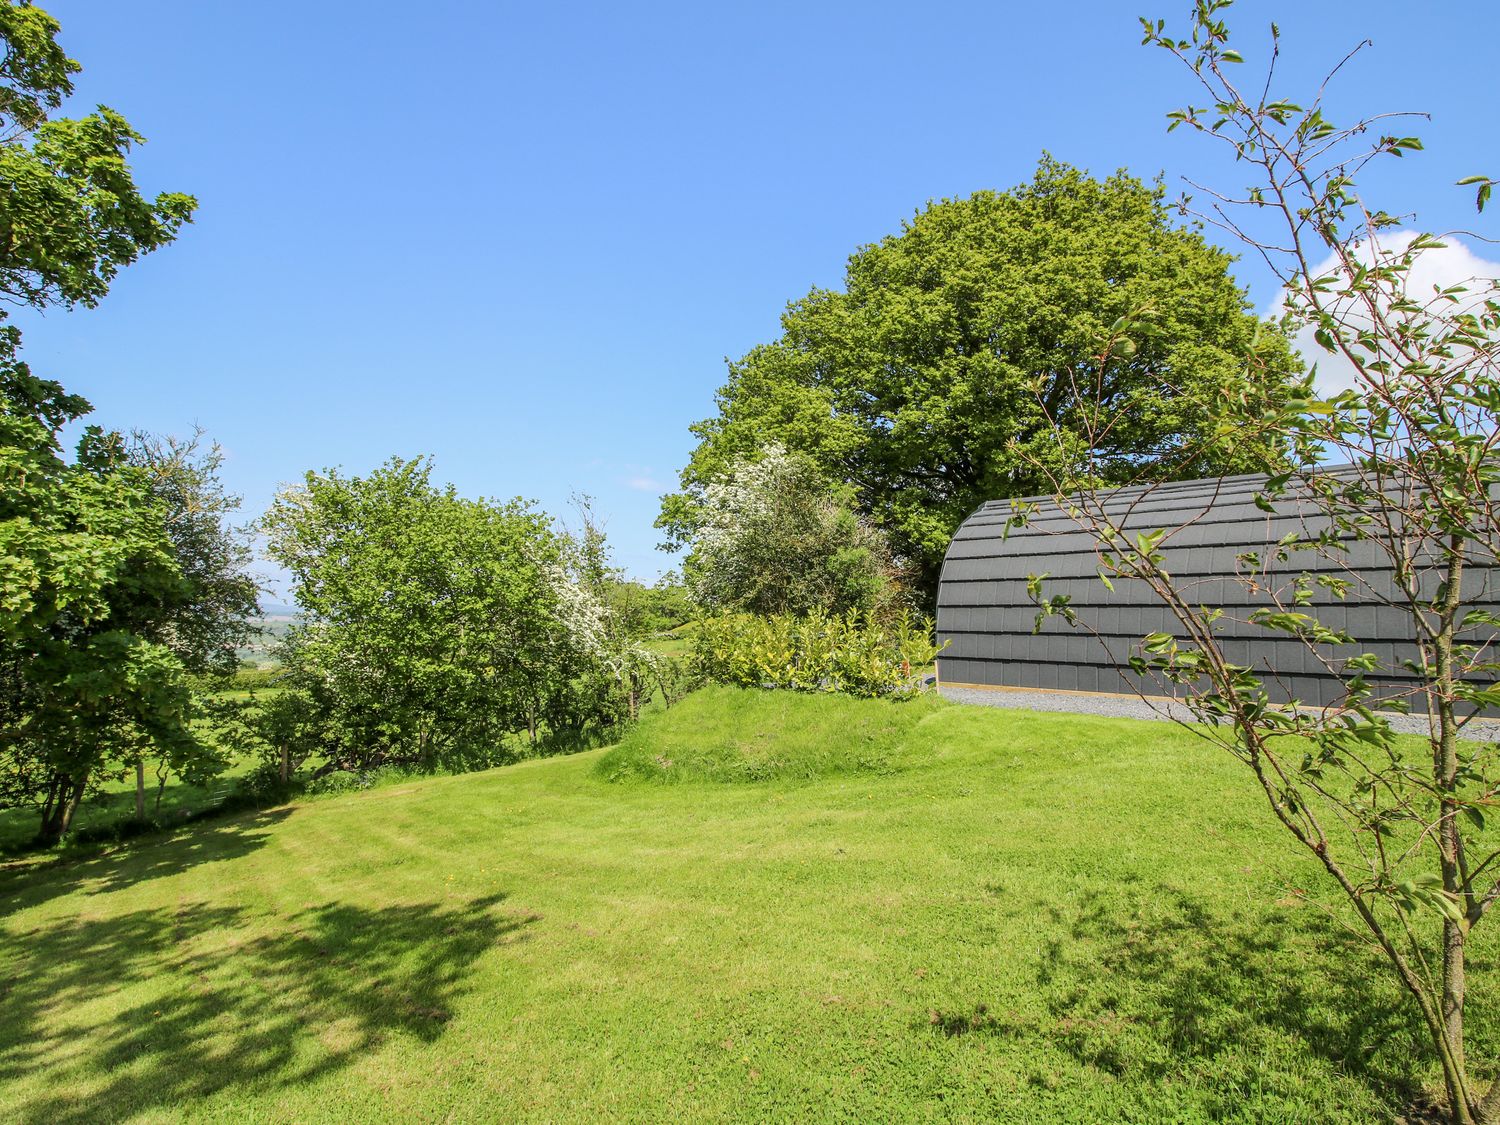 Deri Pod in Guilsfield, Powys, romantic, countryside views, adults-only, stylish, open-plan living,.